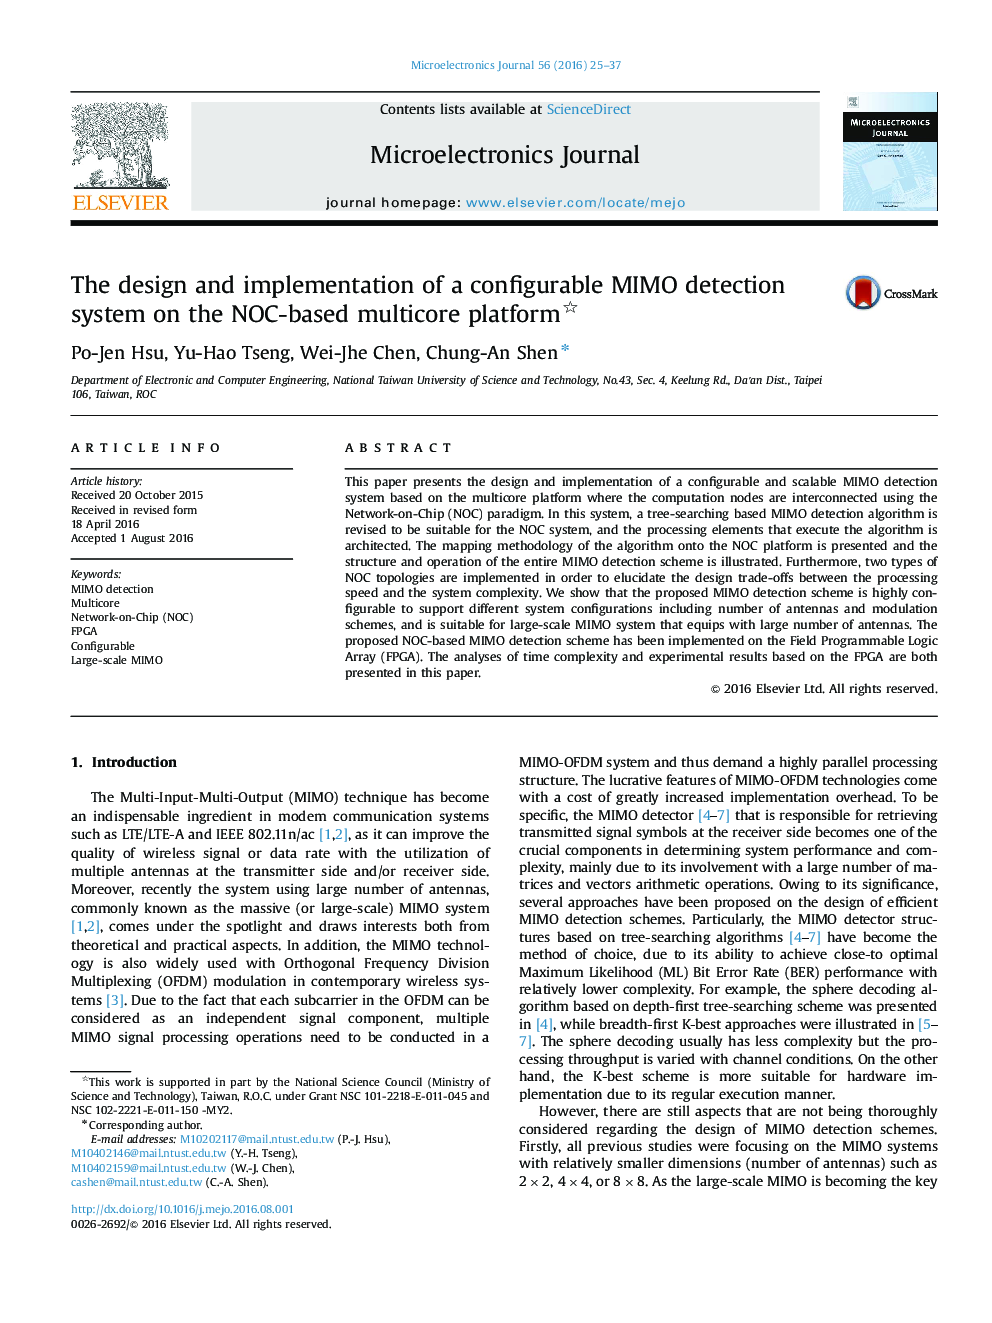 The design and implementation of a configurable MIMO detection system on the NOC-based multicore platform